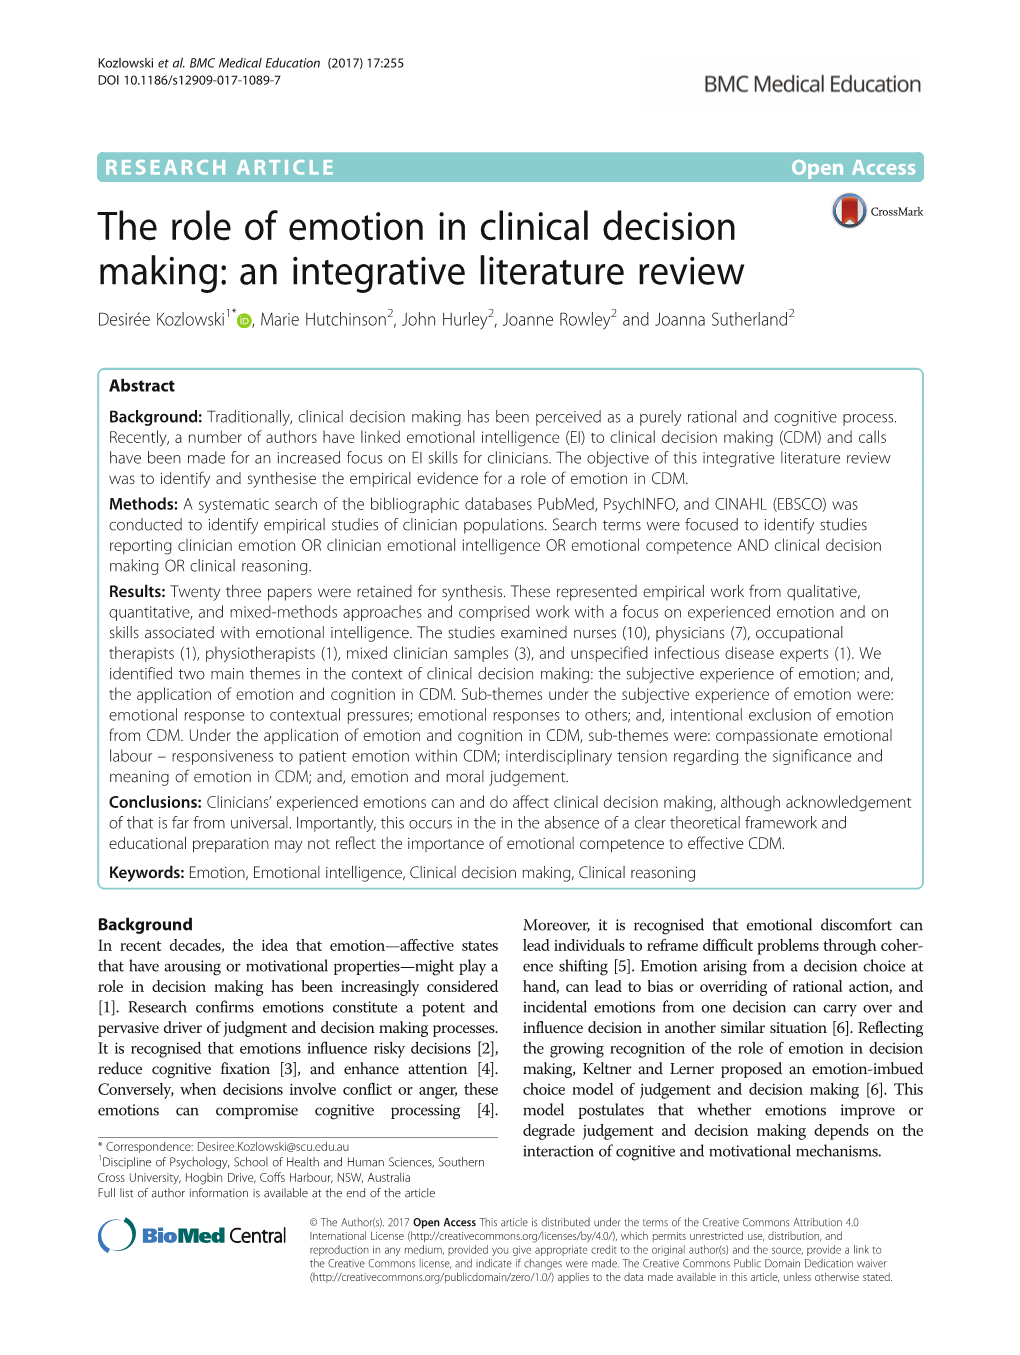 The Role of Emotion in Clinical Decision Making: an Integrative